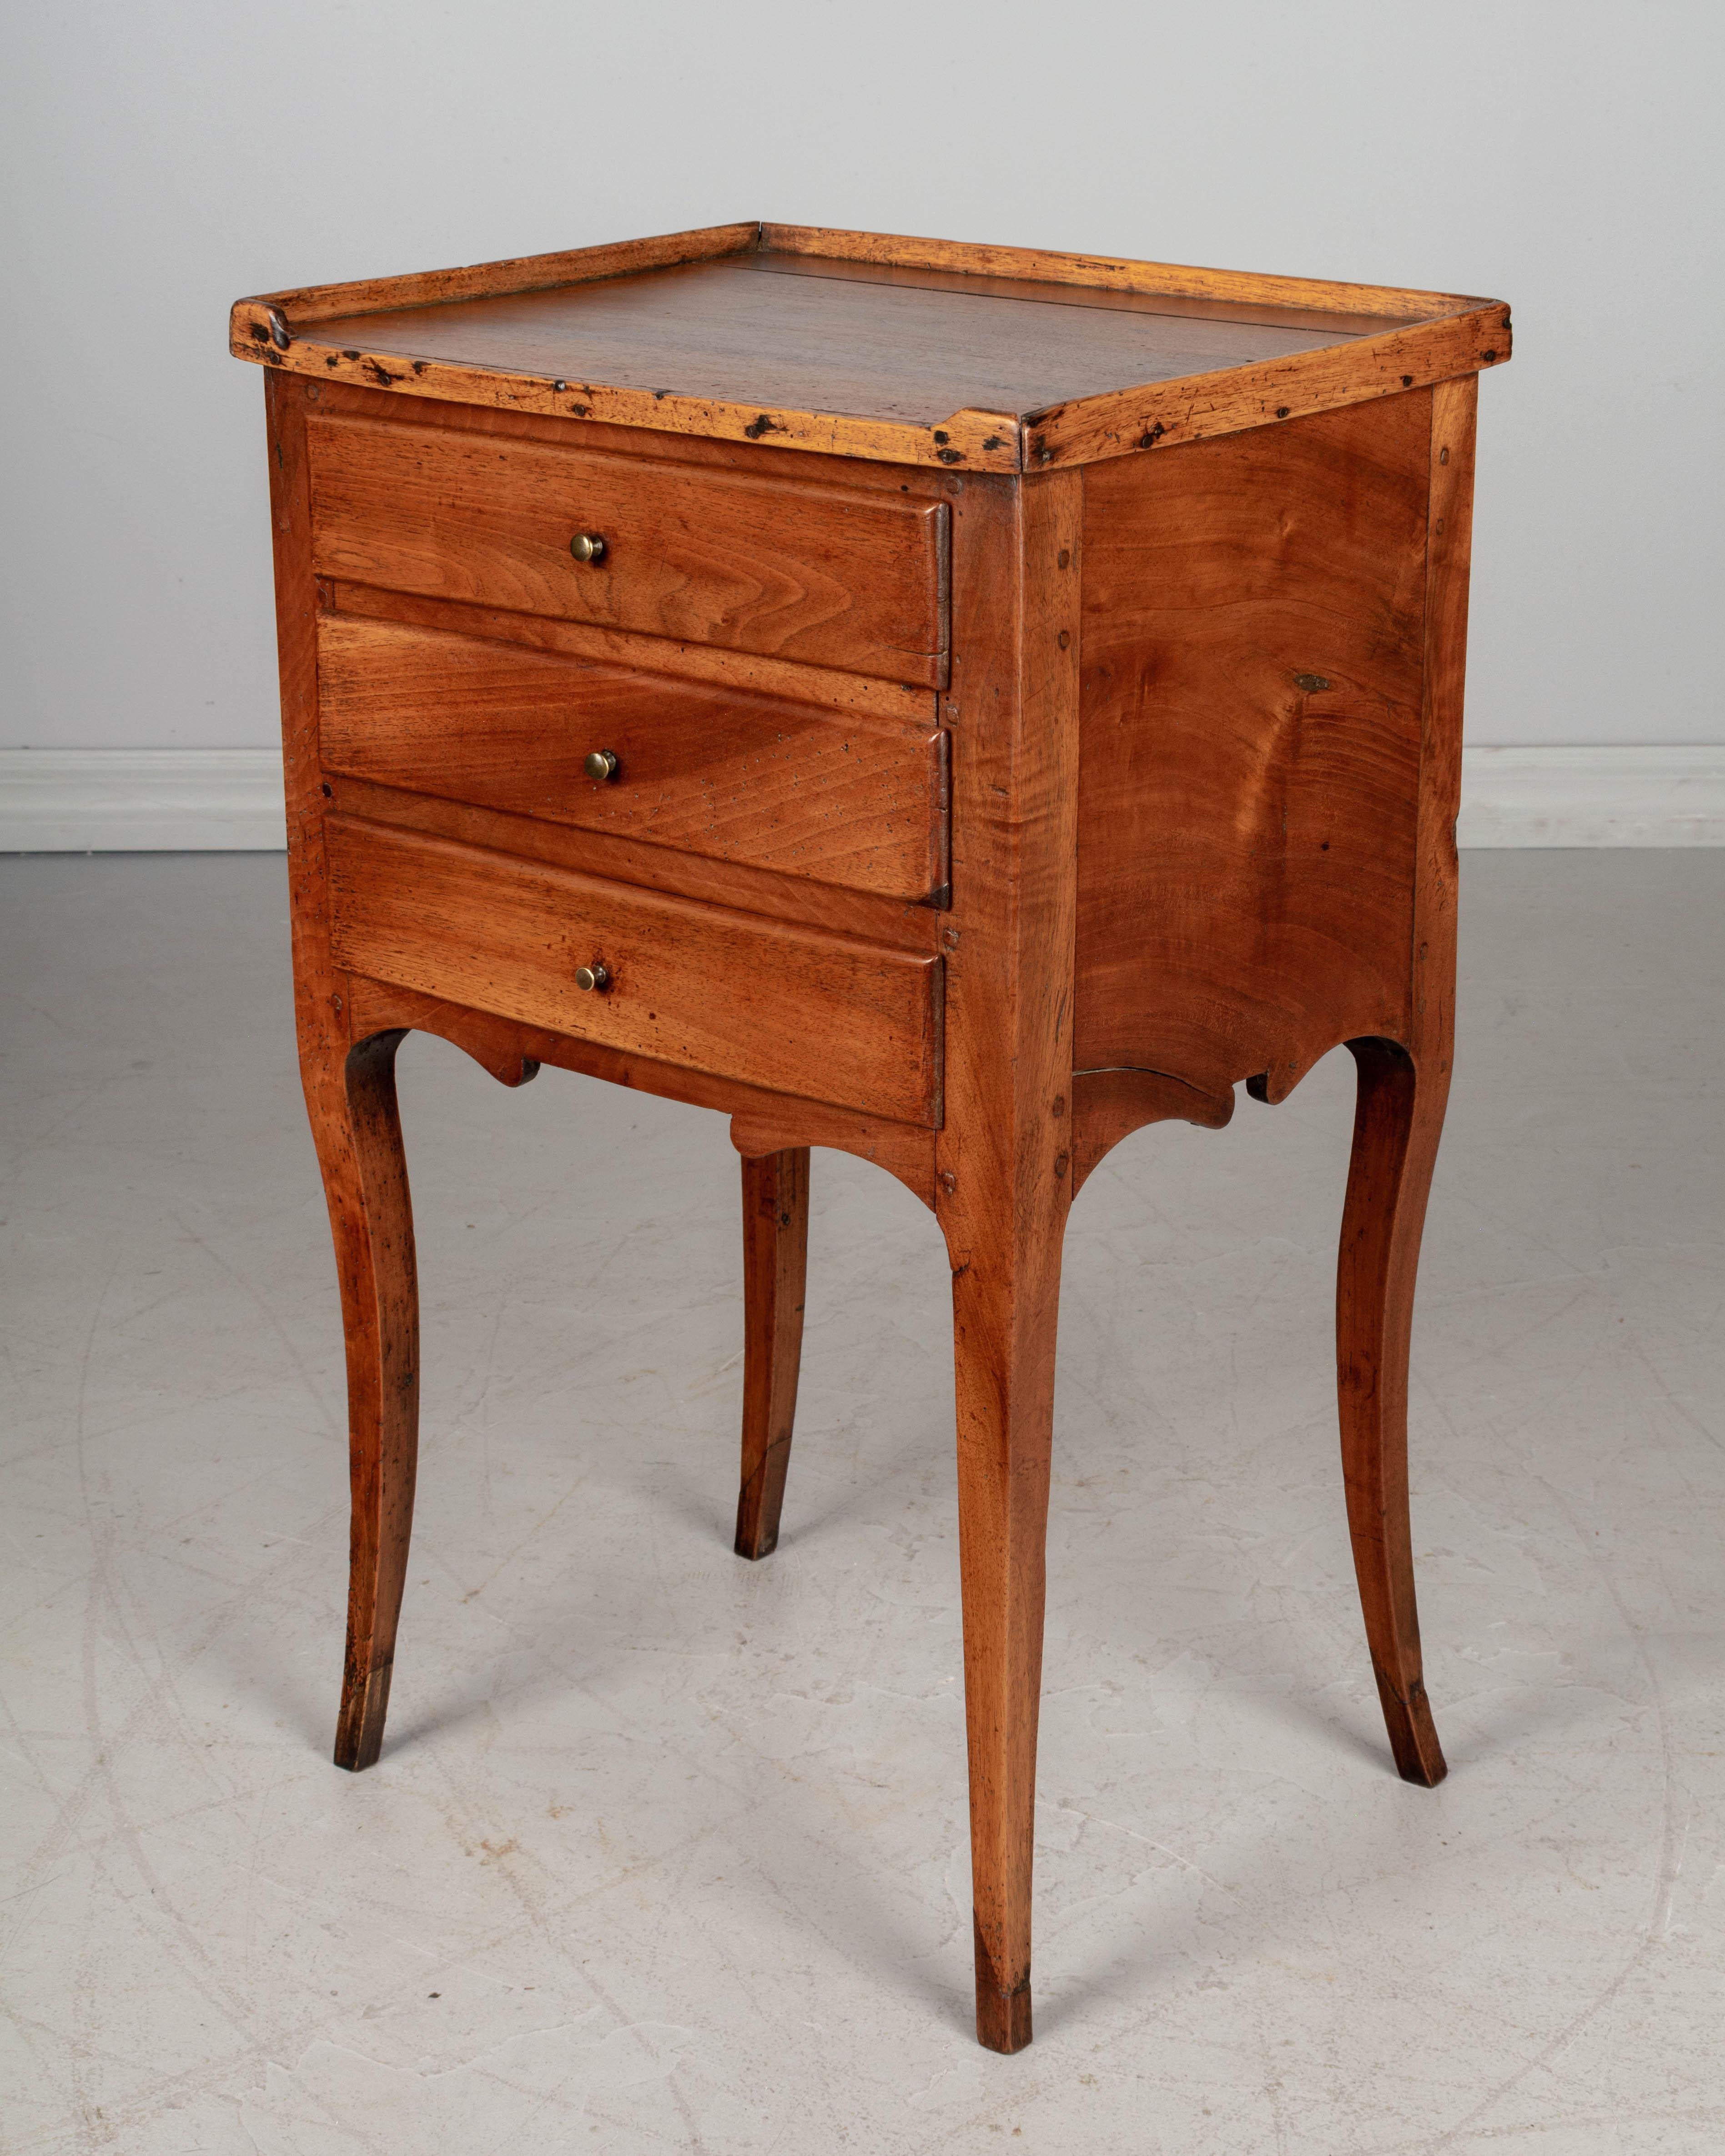 An early 19th century Louis XV style country French walnut side table, or nightstand, with curved legs and raised gallery. Three dovetailed drawers with small brass knobs. The interior of the top drawer is divided into small compartments.